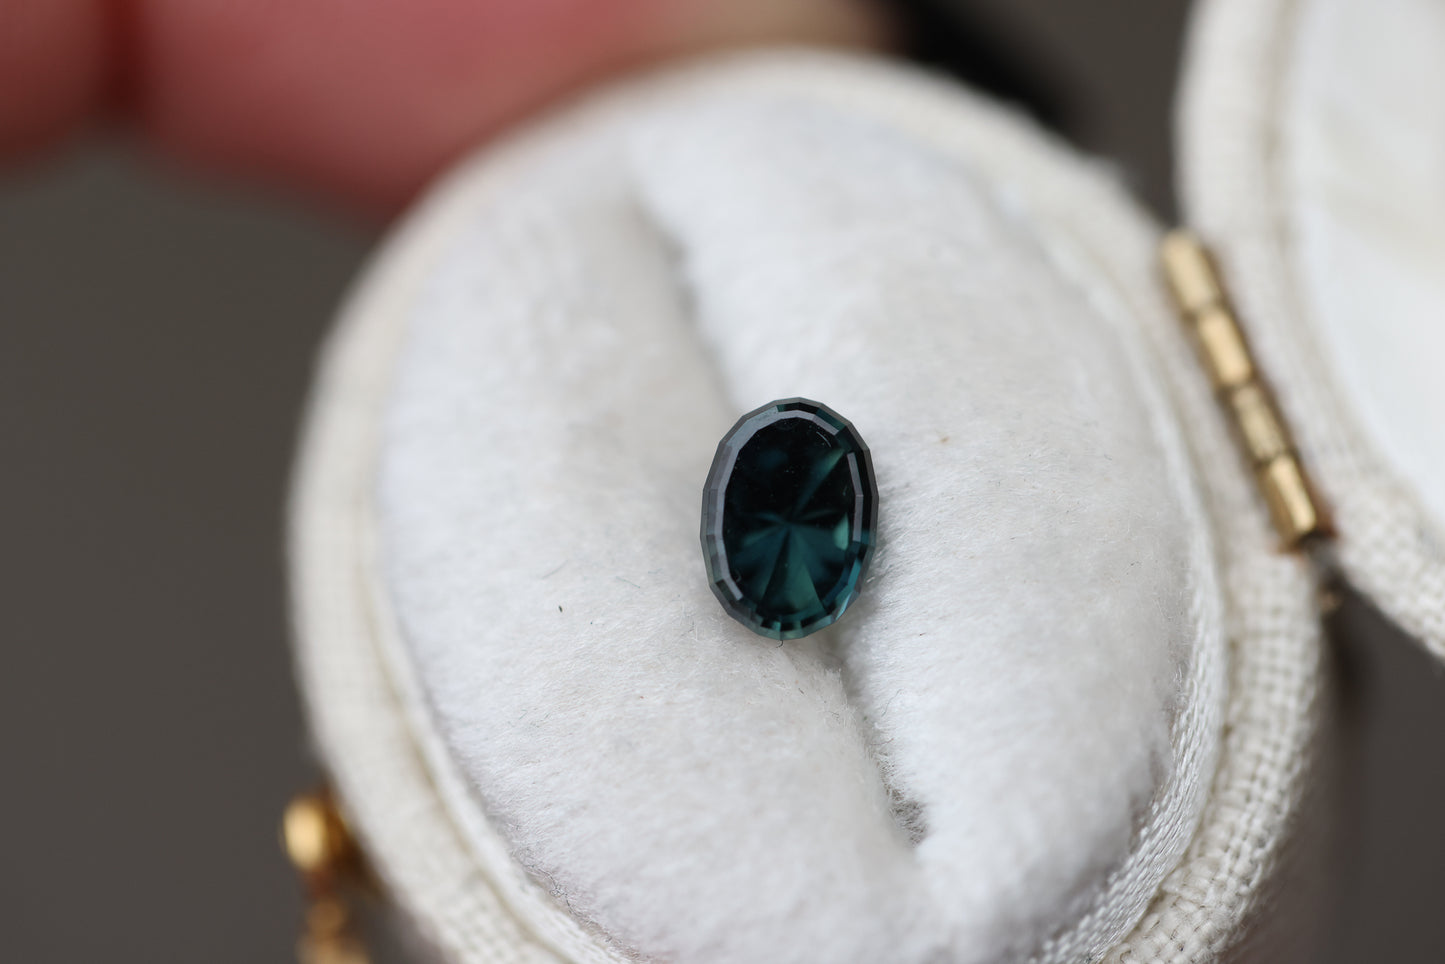 Load image into Gallery viewer, 1.15ct oval deep dark green teal sapphire - Regal Radiant by John Dyer
